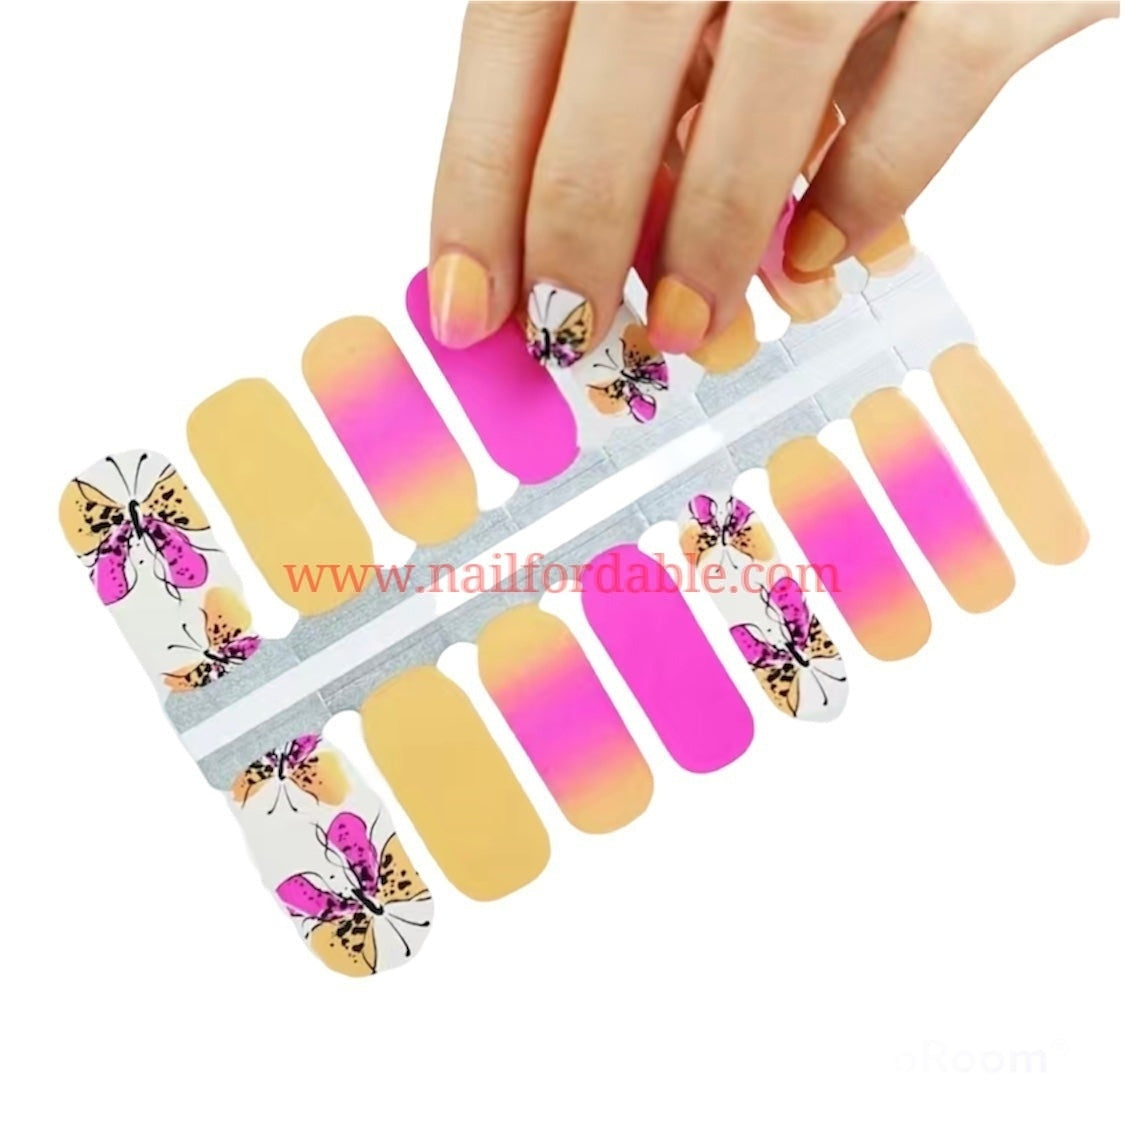 Butterflies of Spring Nail Wraps | Semi Cured Gel Wraps | Gel Nail Wraps |Nail Polish | Nail Stickers